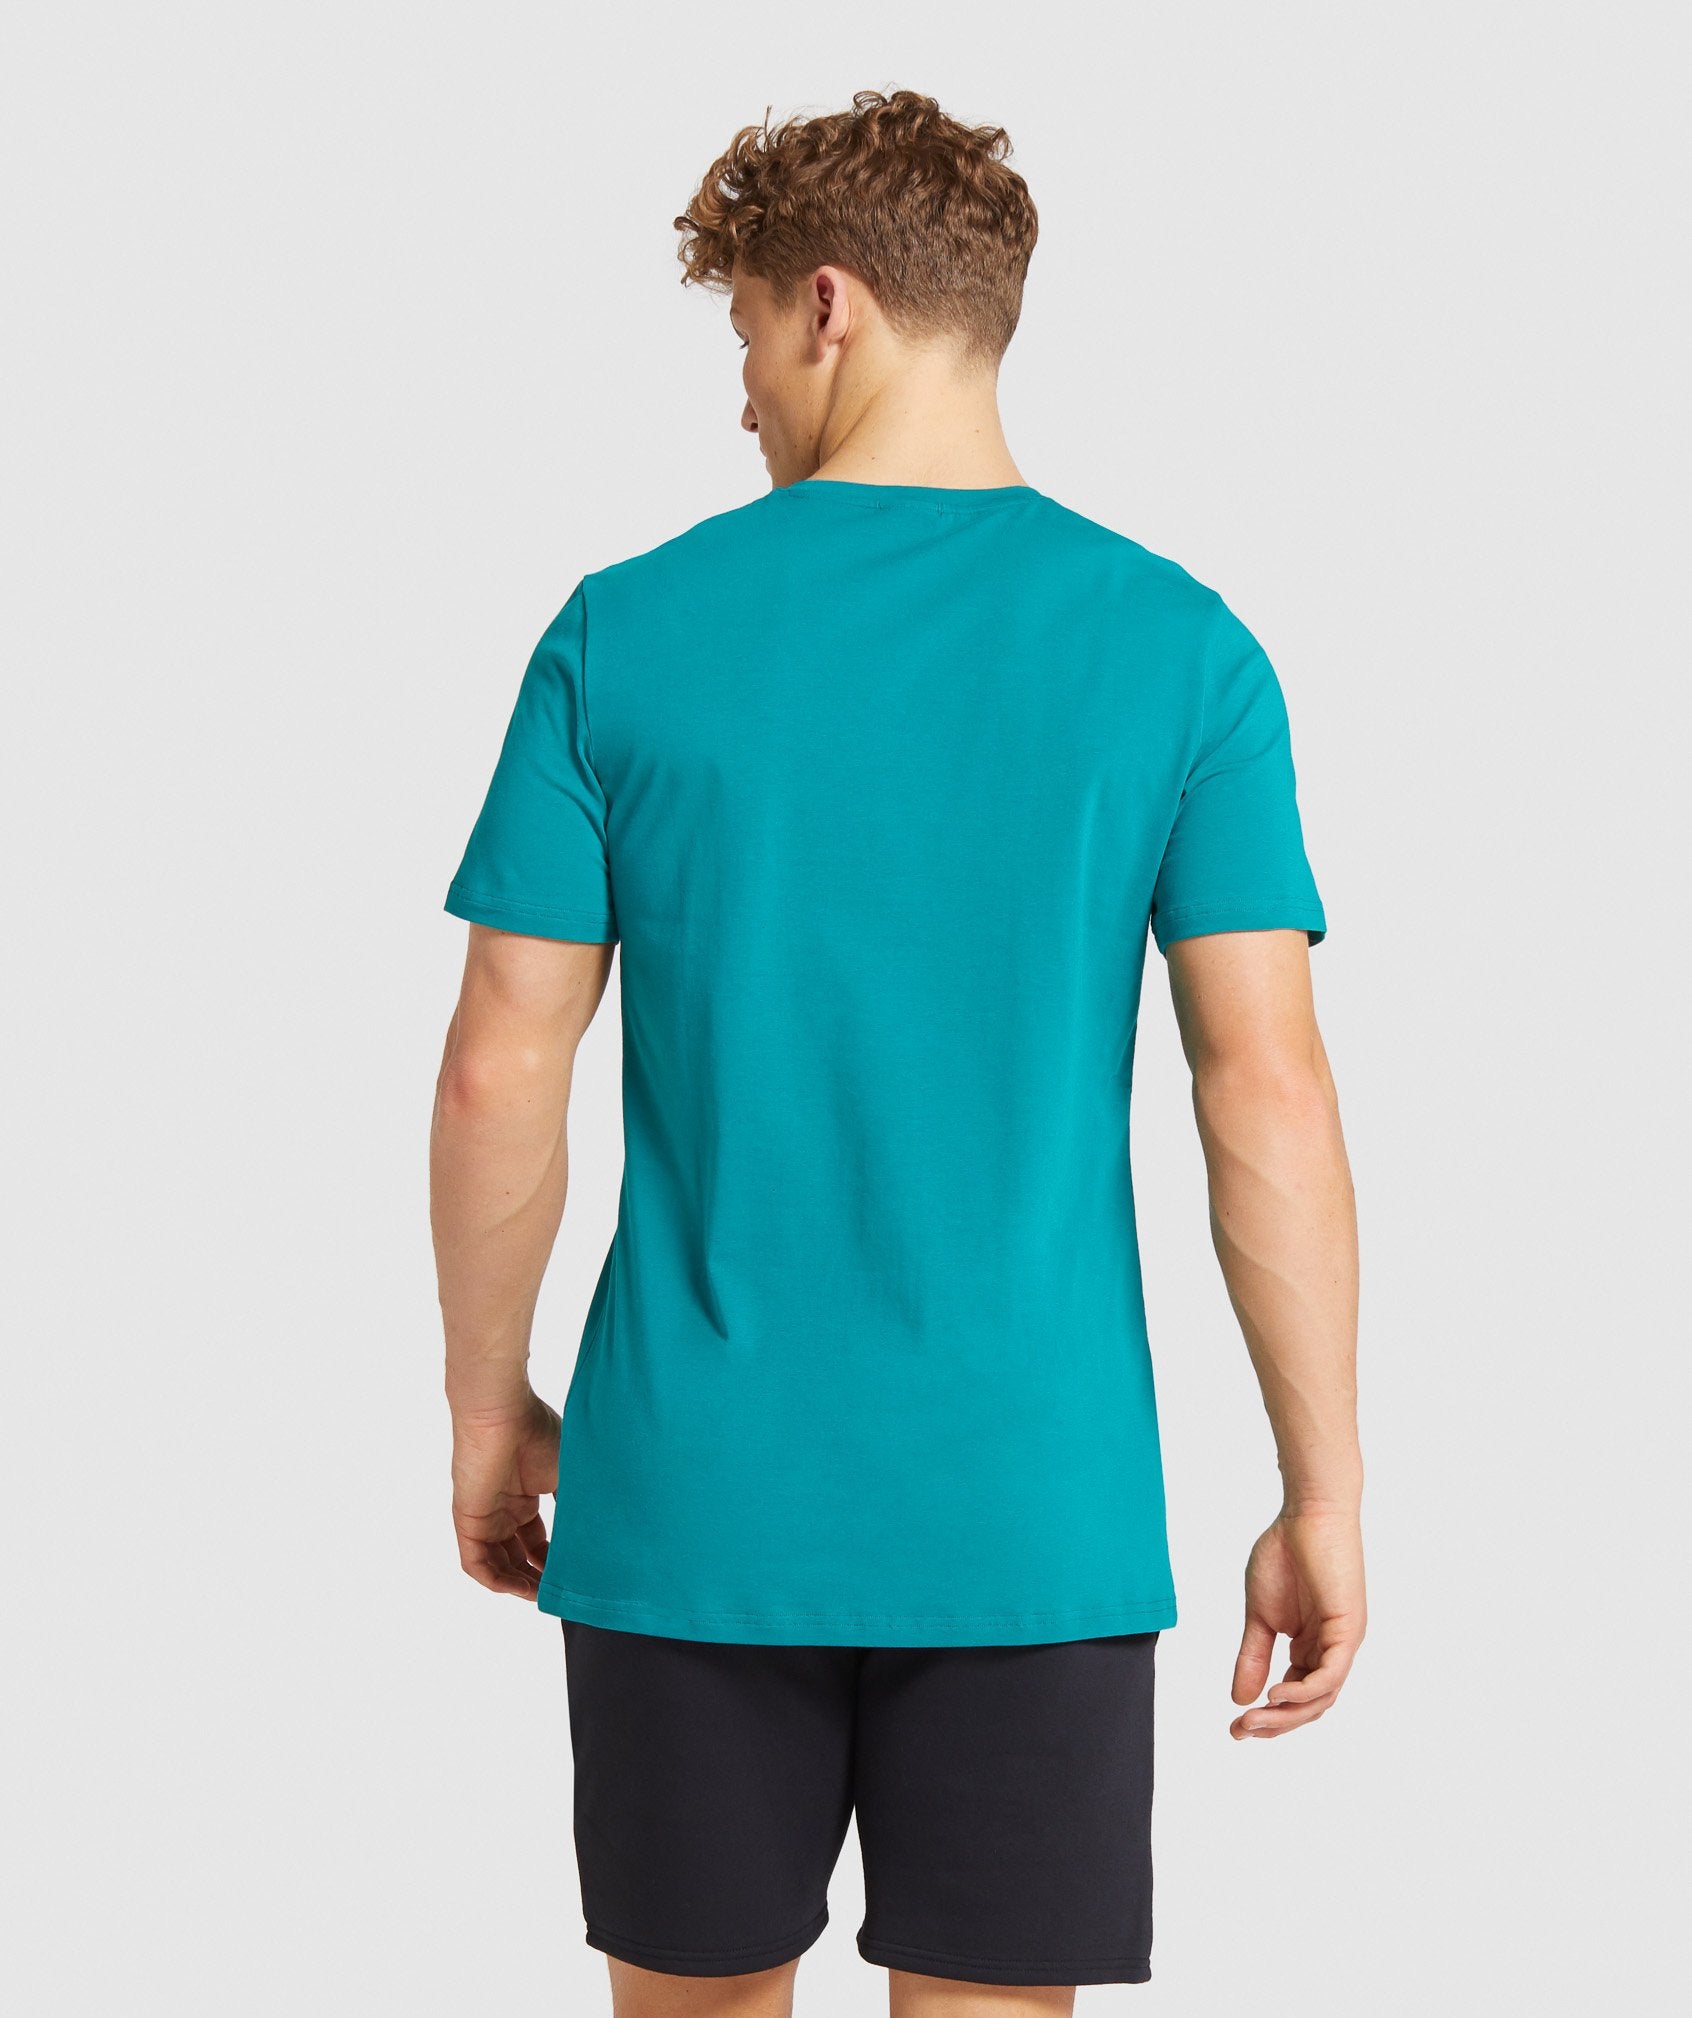 Legacy T-Shirt in Emerald Green - view 2